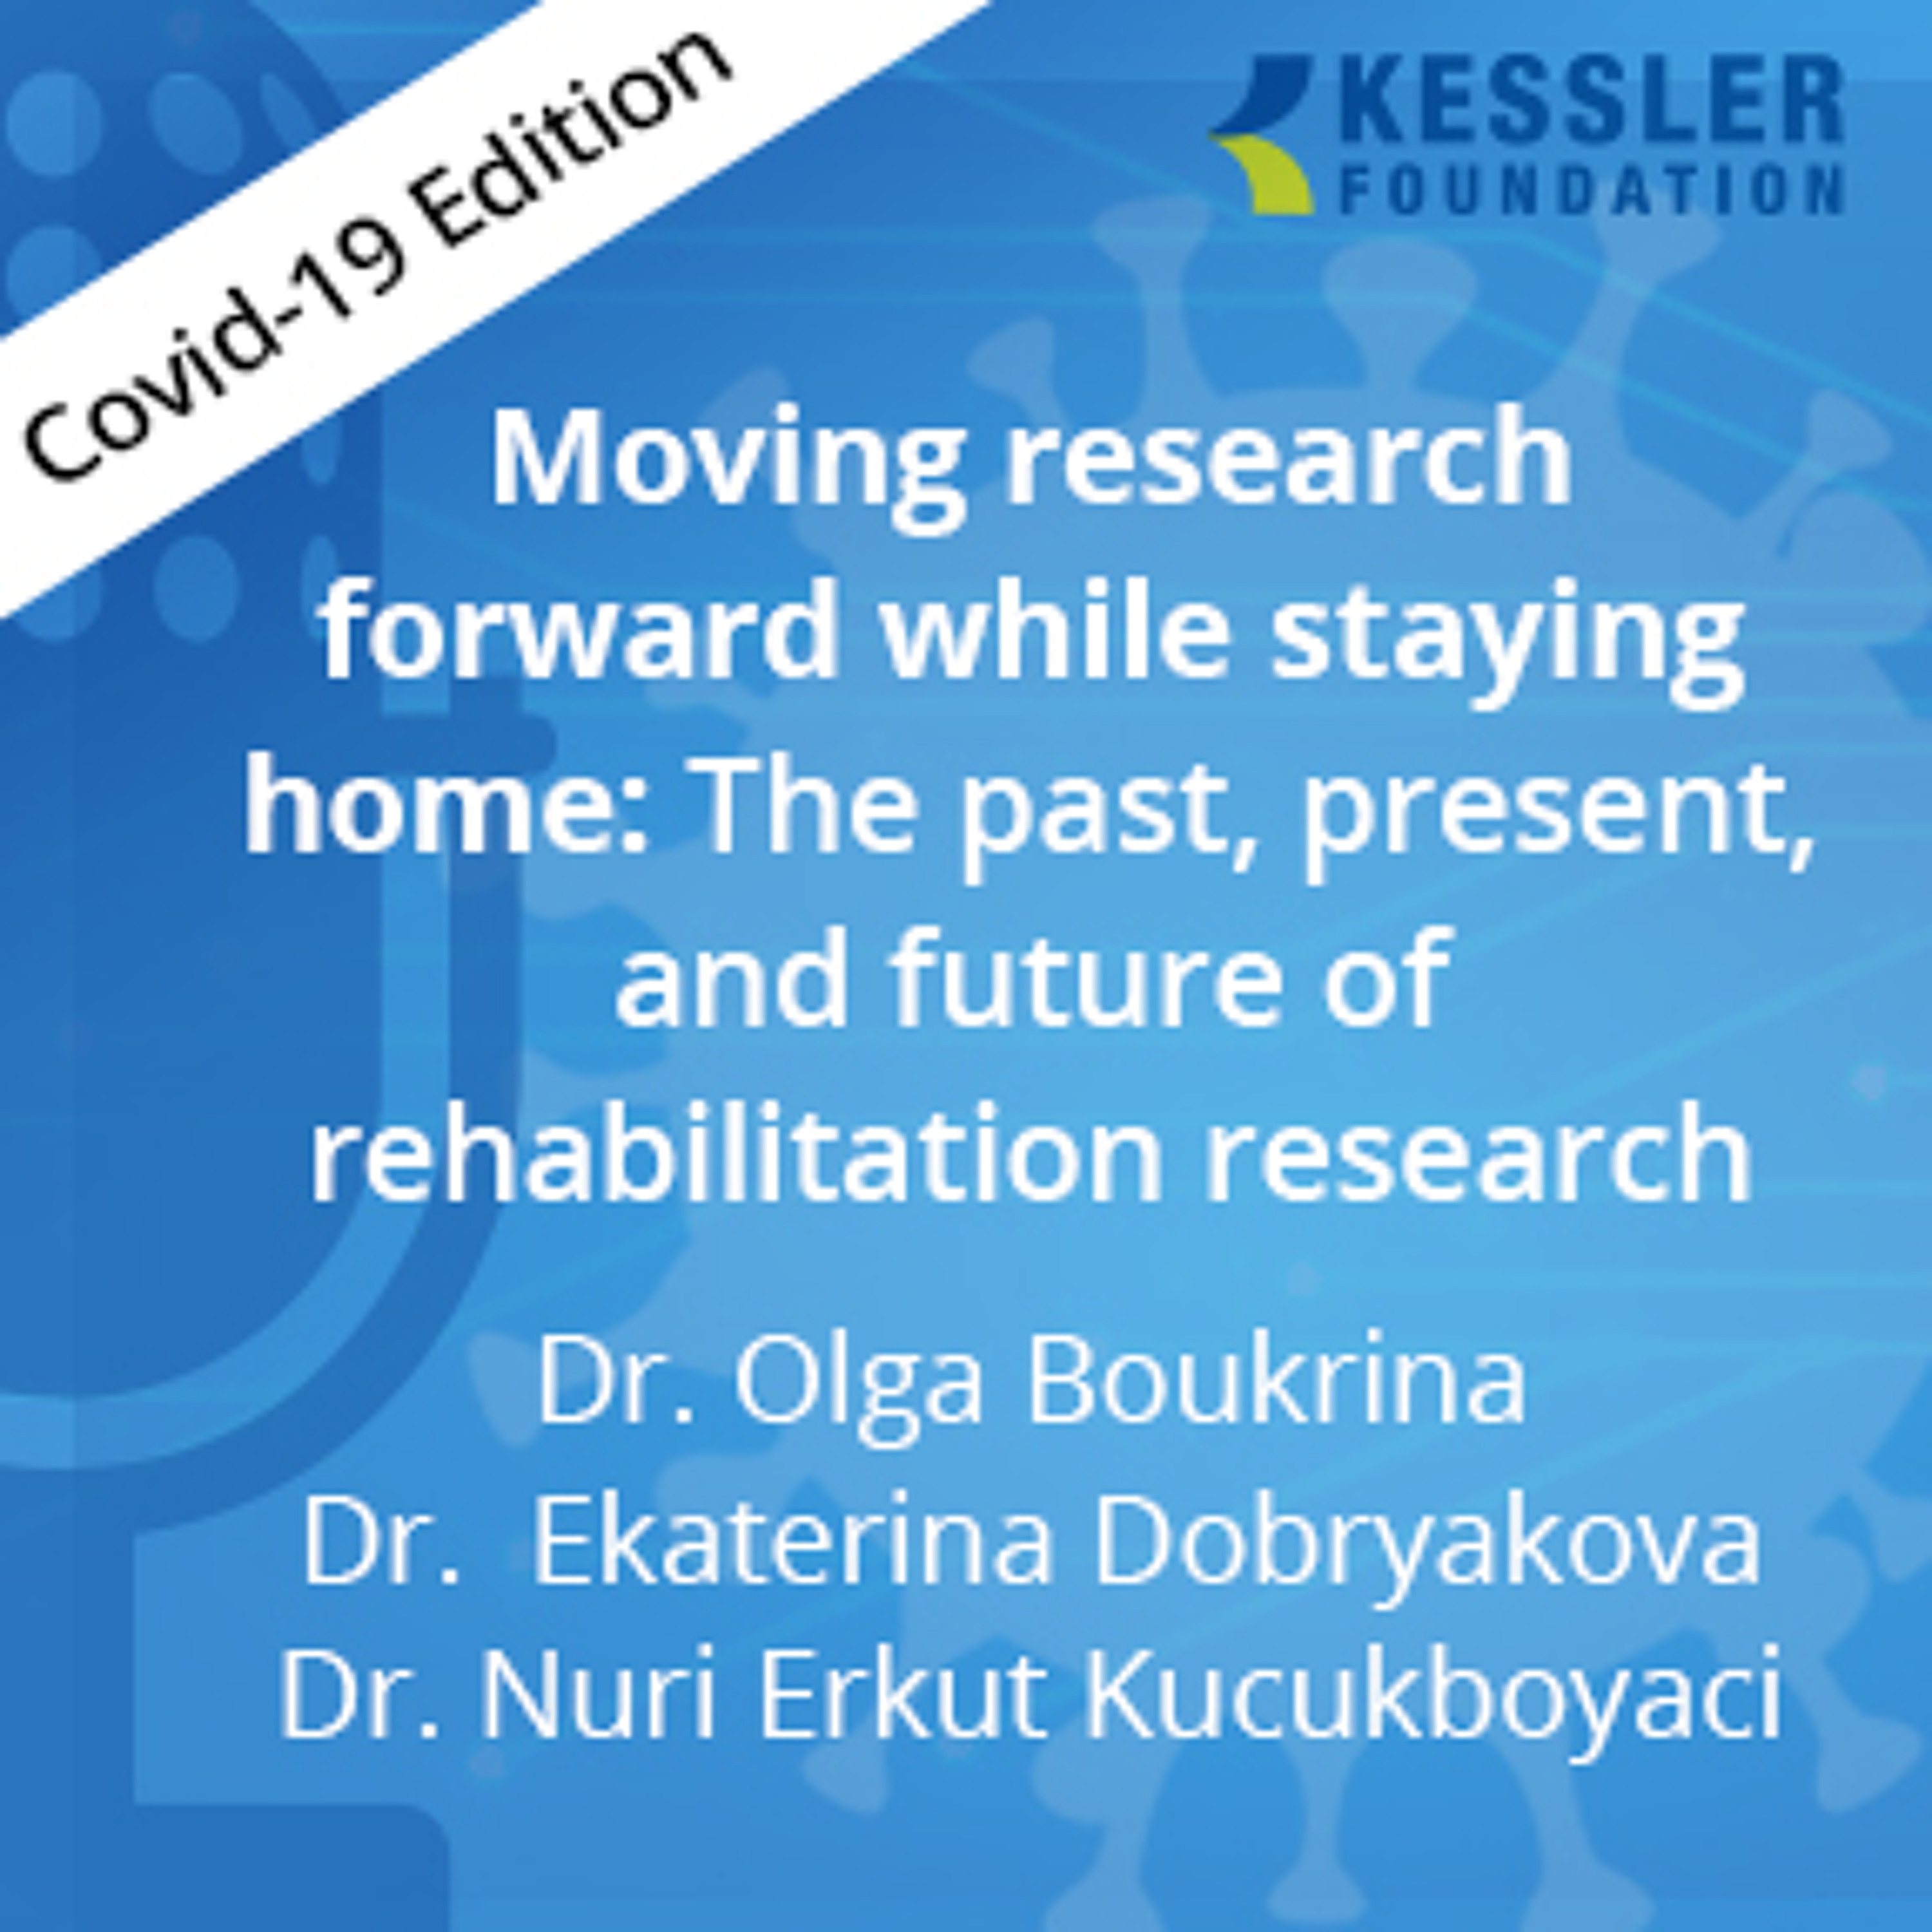 Moving research forward while staying home:Past, present, and future of rehab research-COVID-19, Ep4